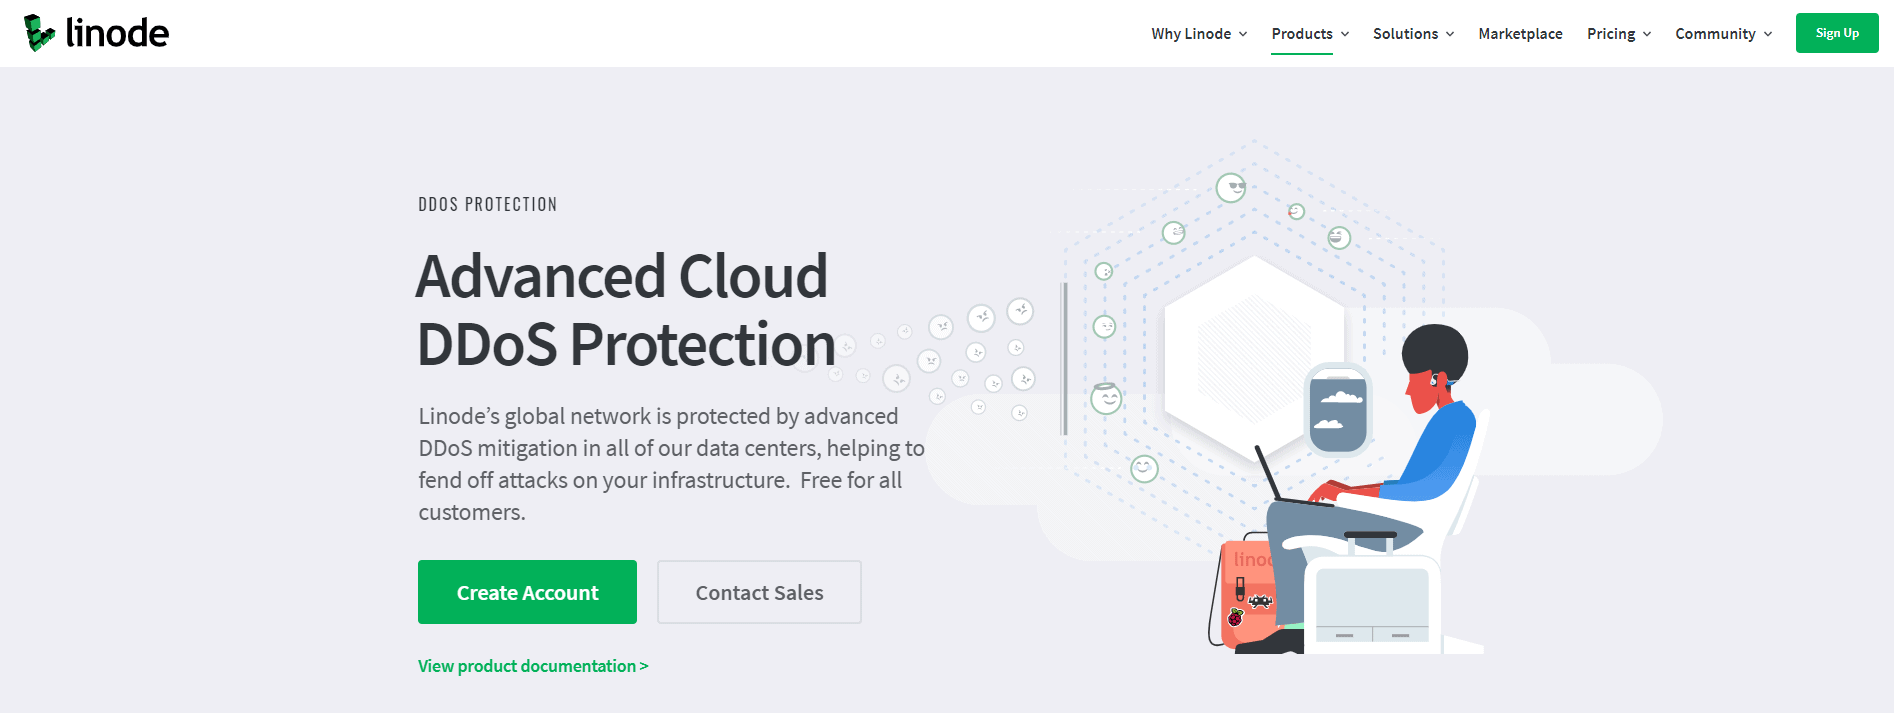 Linode DDoS Protection - Linode Review